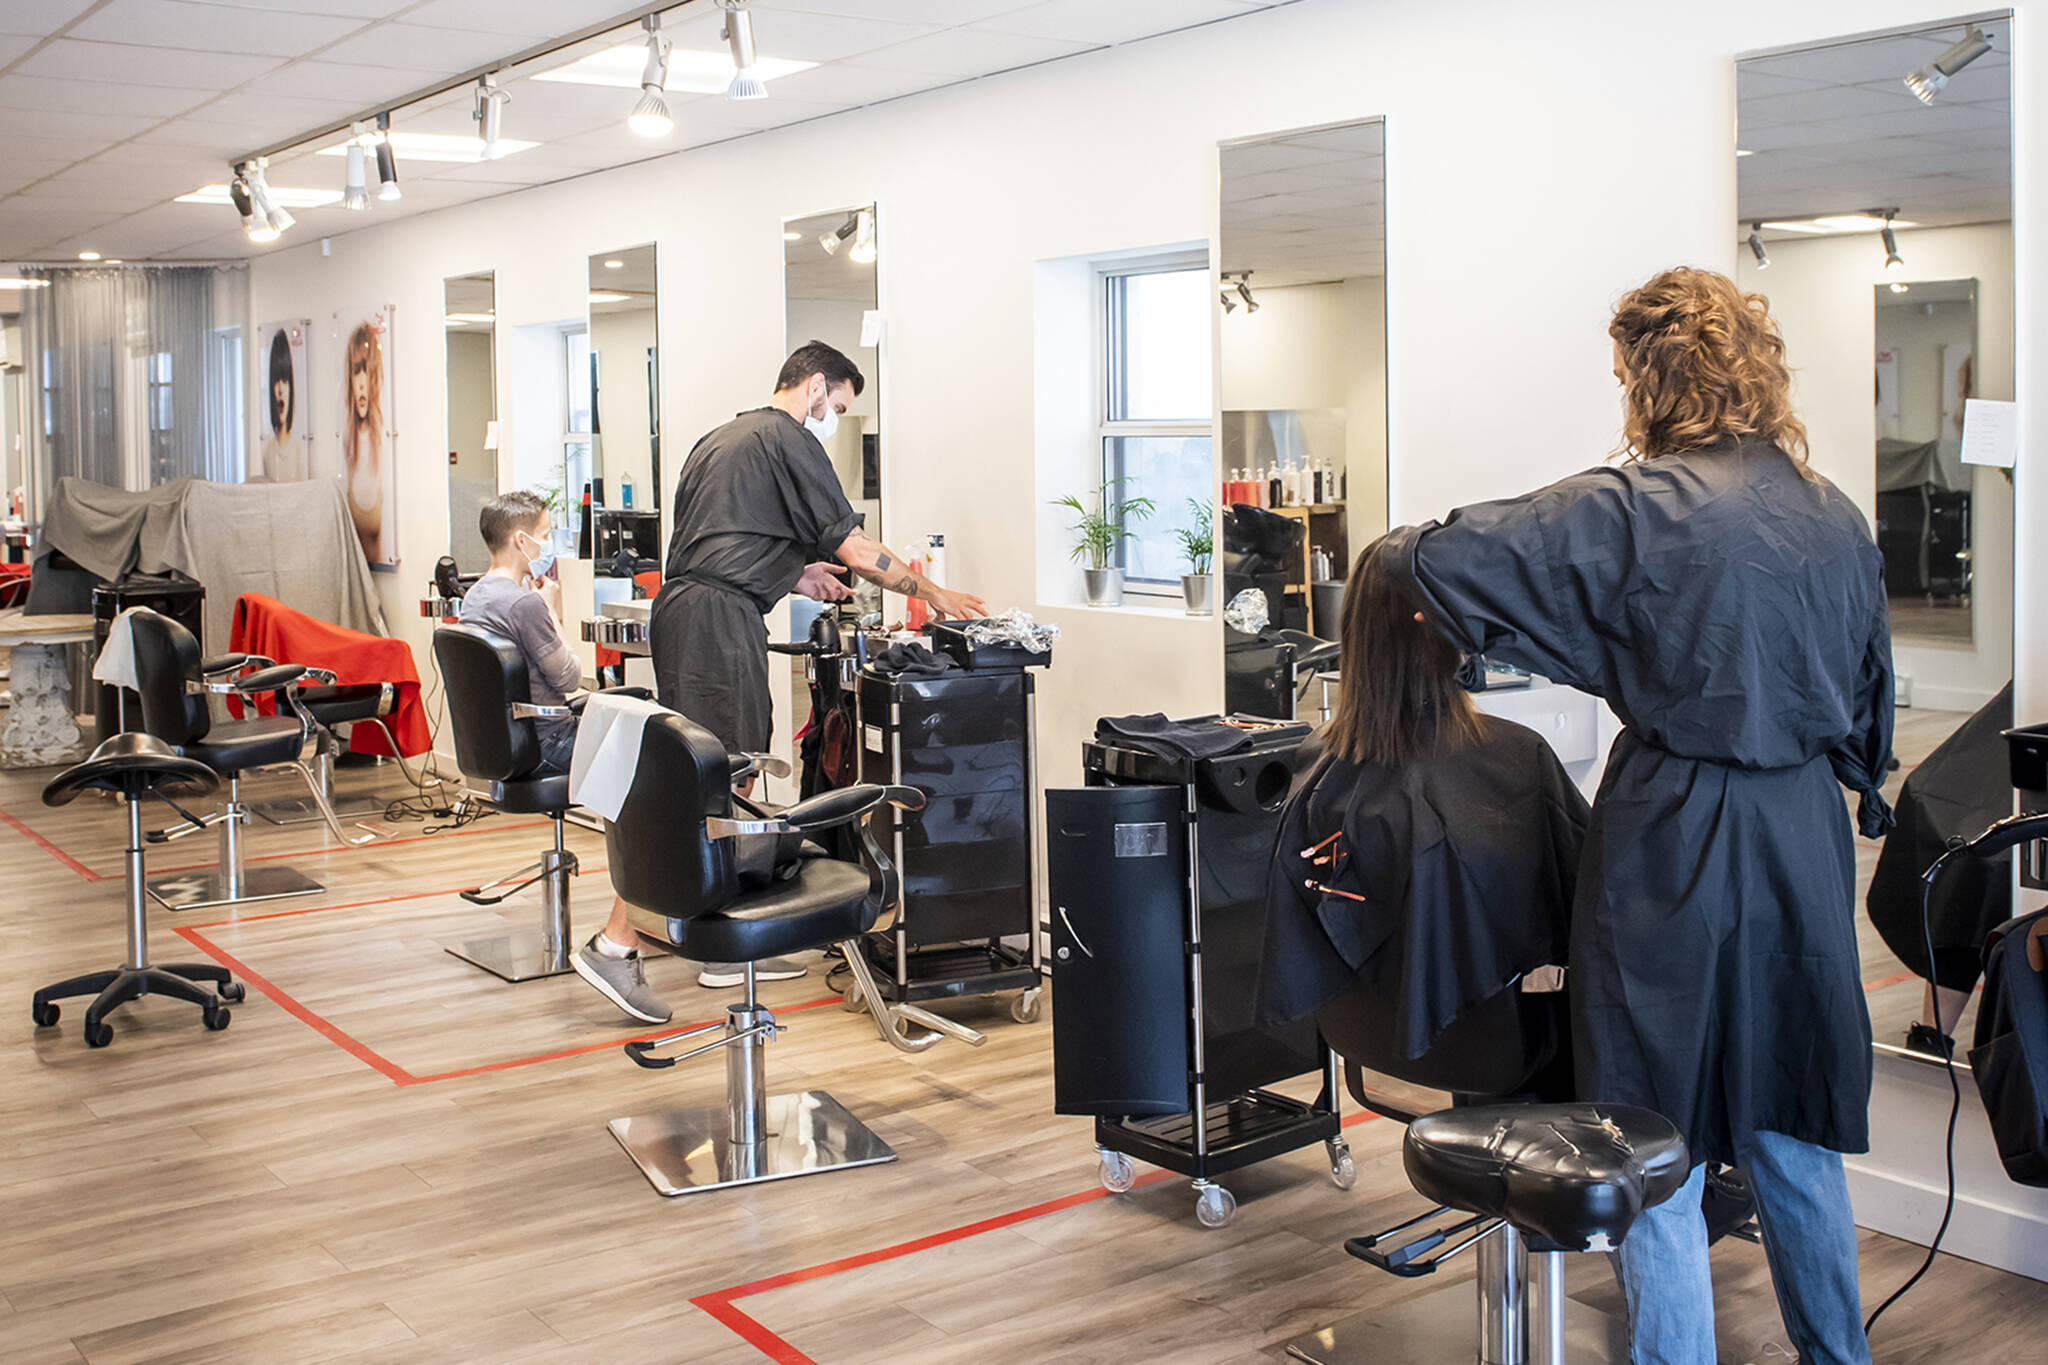 Toronto salons fight lockdown by showing how little they contributed to